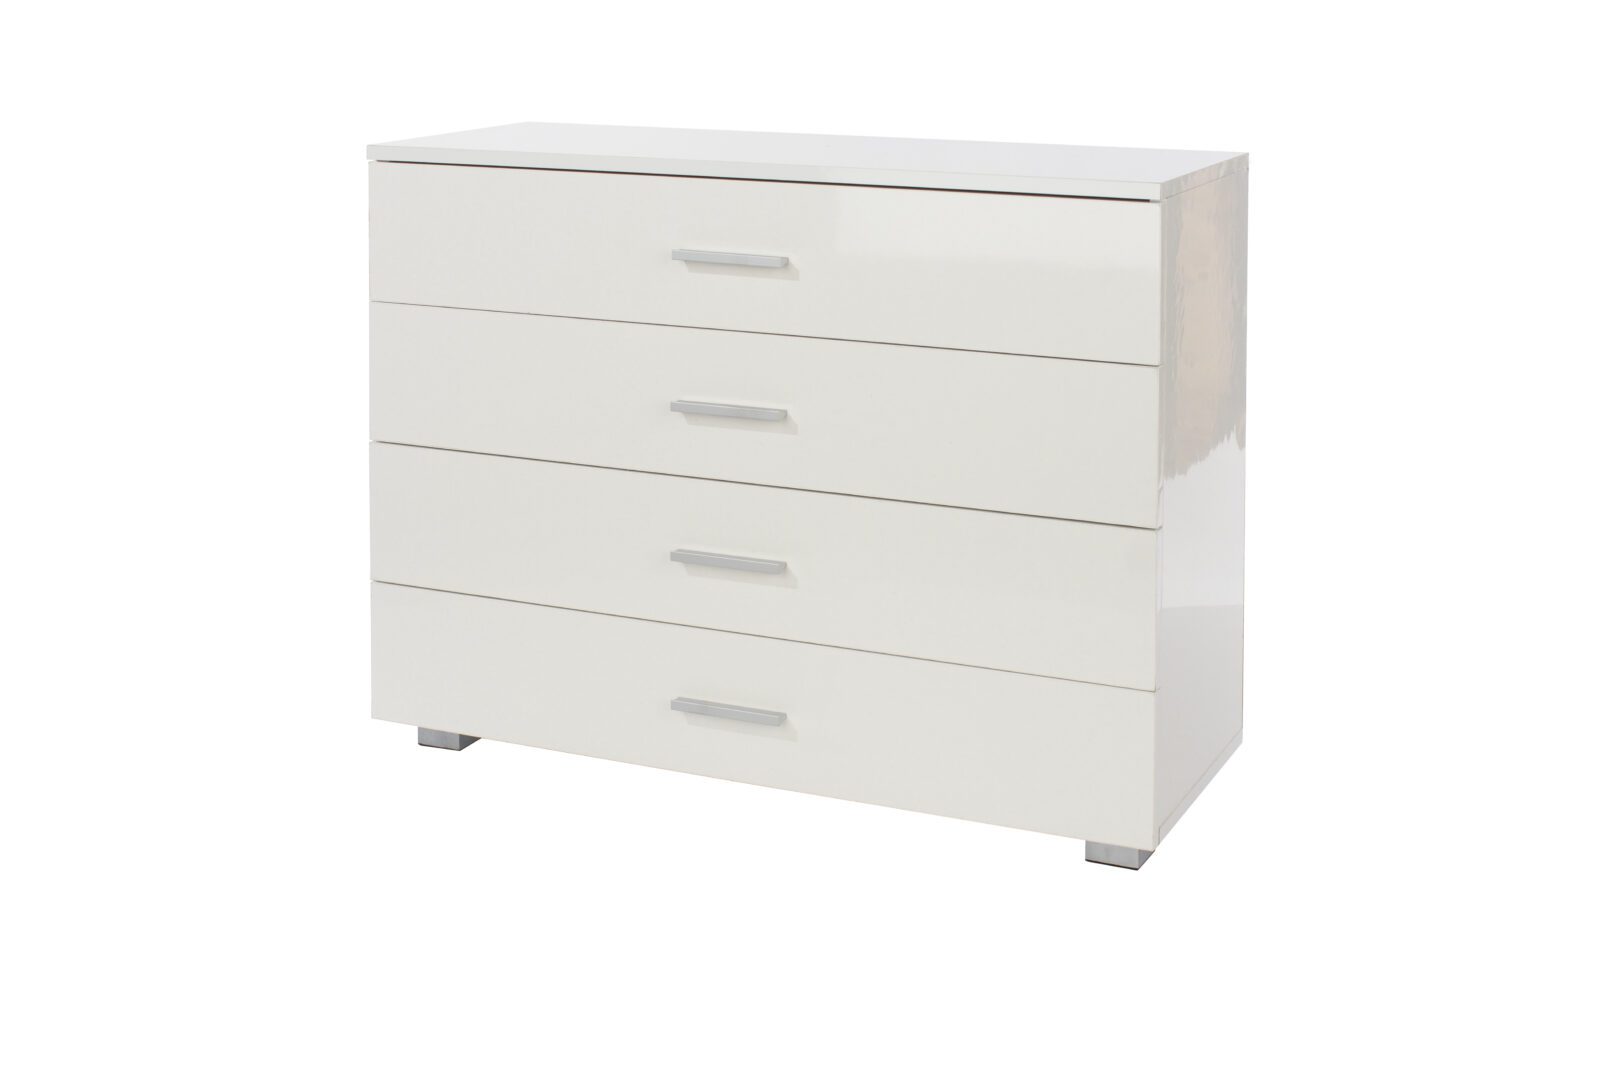 Lanny 4 Chest Of Drawers - White